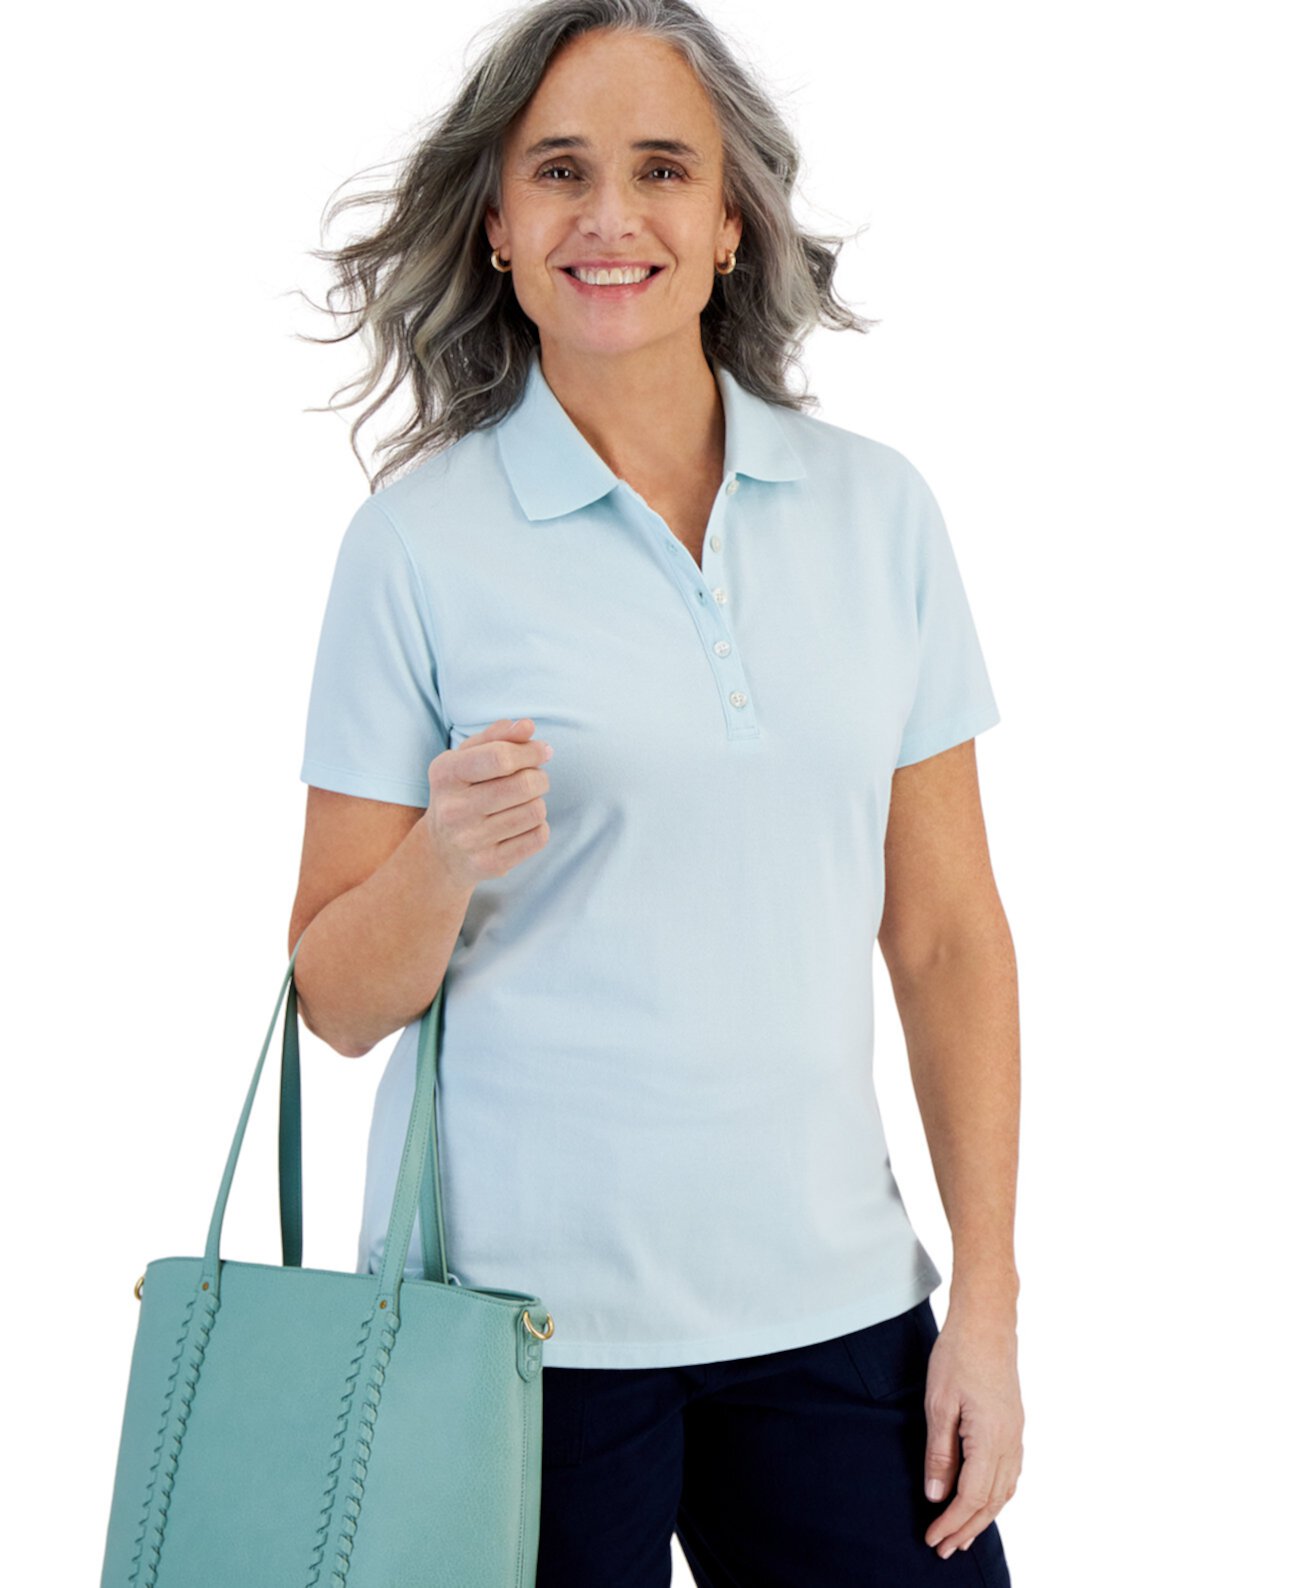 Women's Short-Sleeve Cotton Polo Shirt, Created for Macy's Style & Co